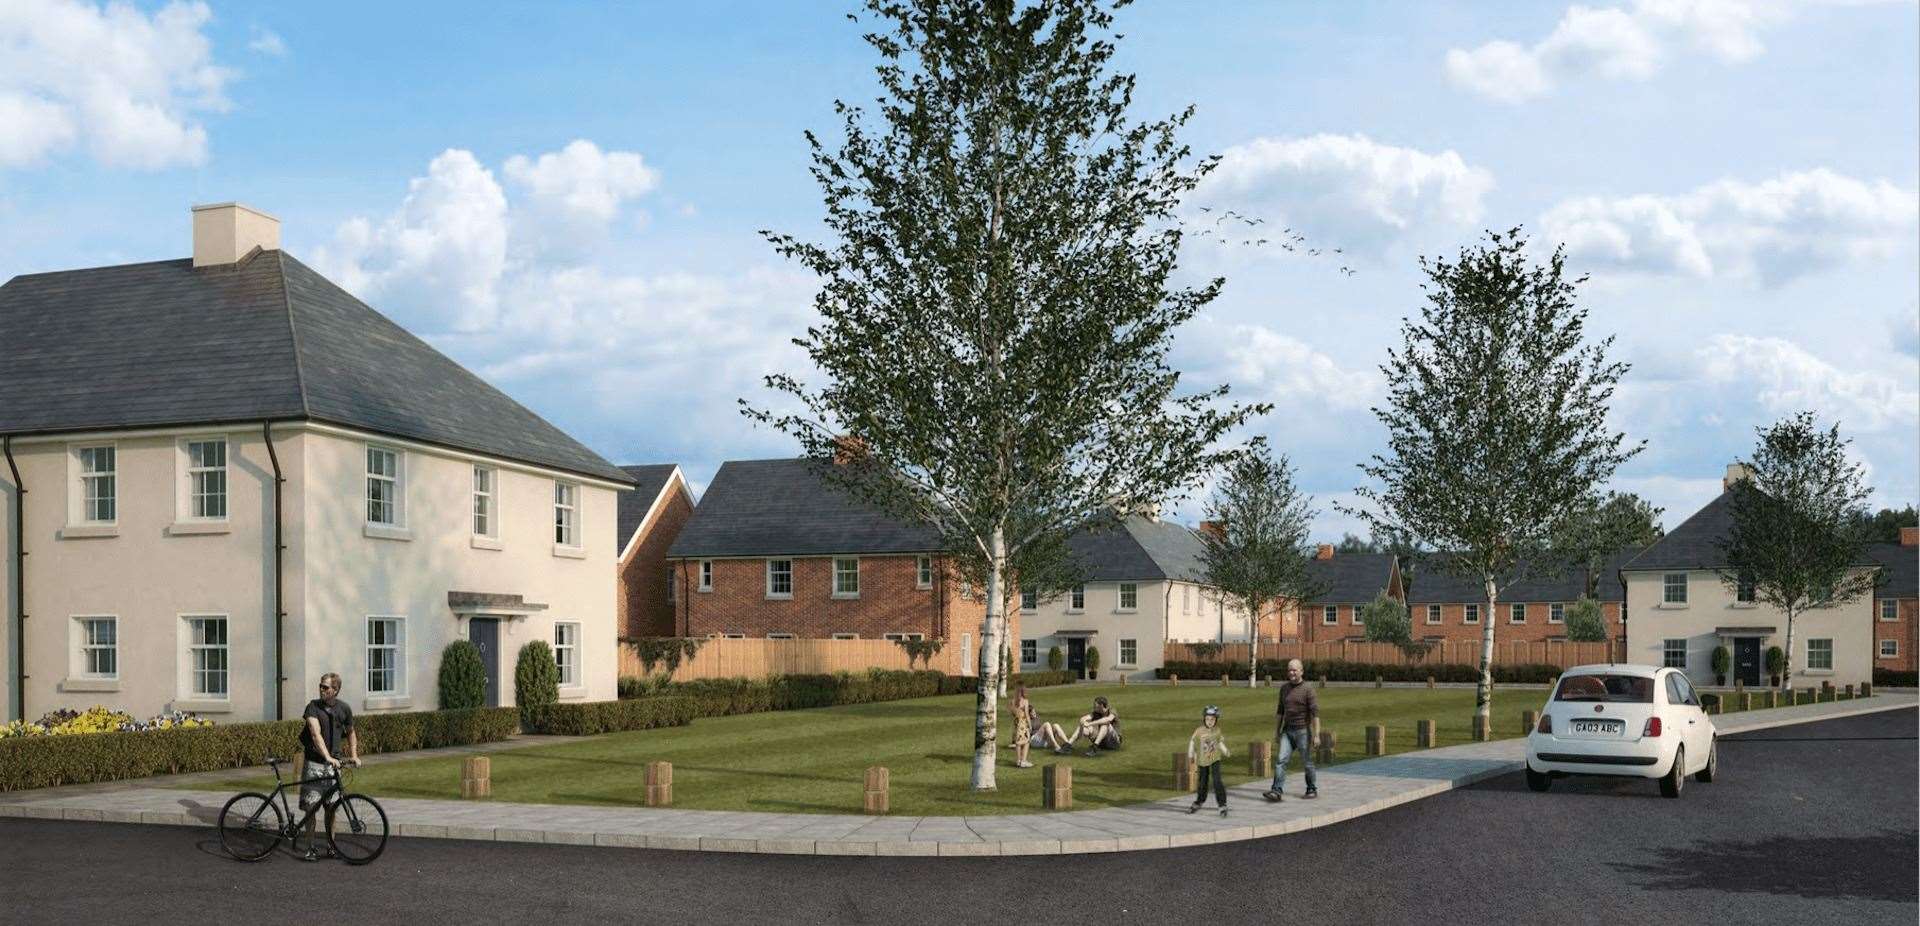 Afrtist's impression of the new homes at Cottington Park. Submitted picture